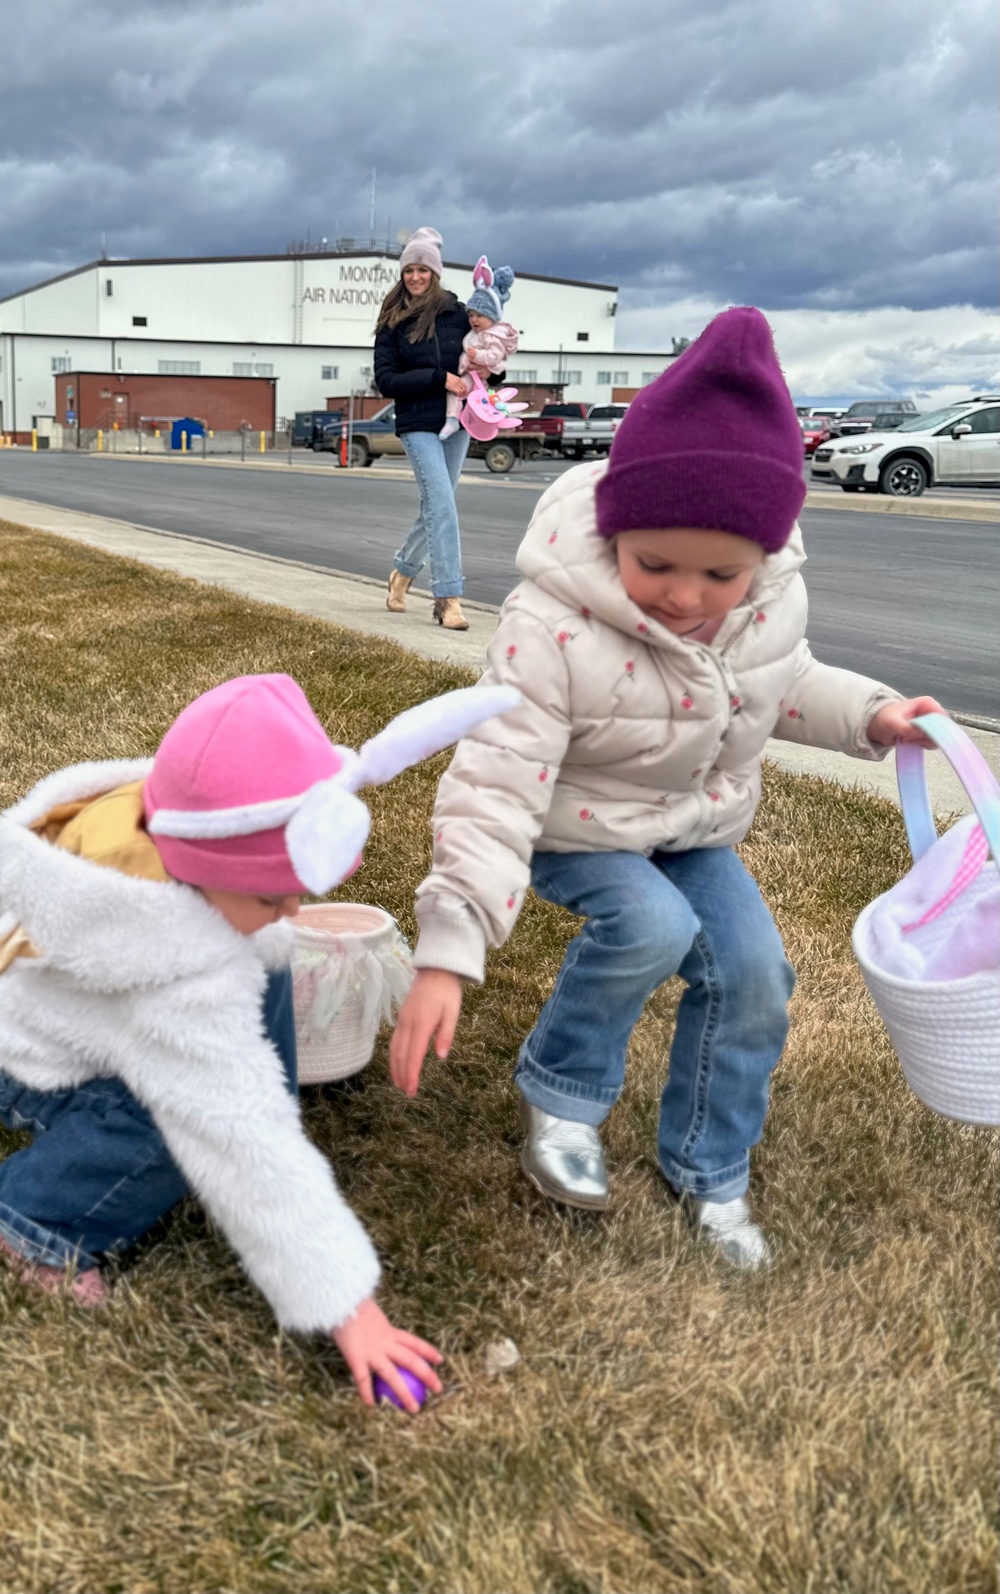 Easter comes early to the 120th Airlift Wing.